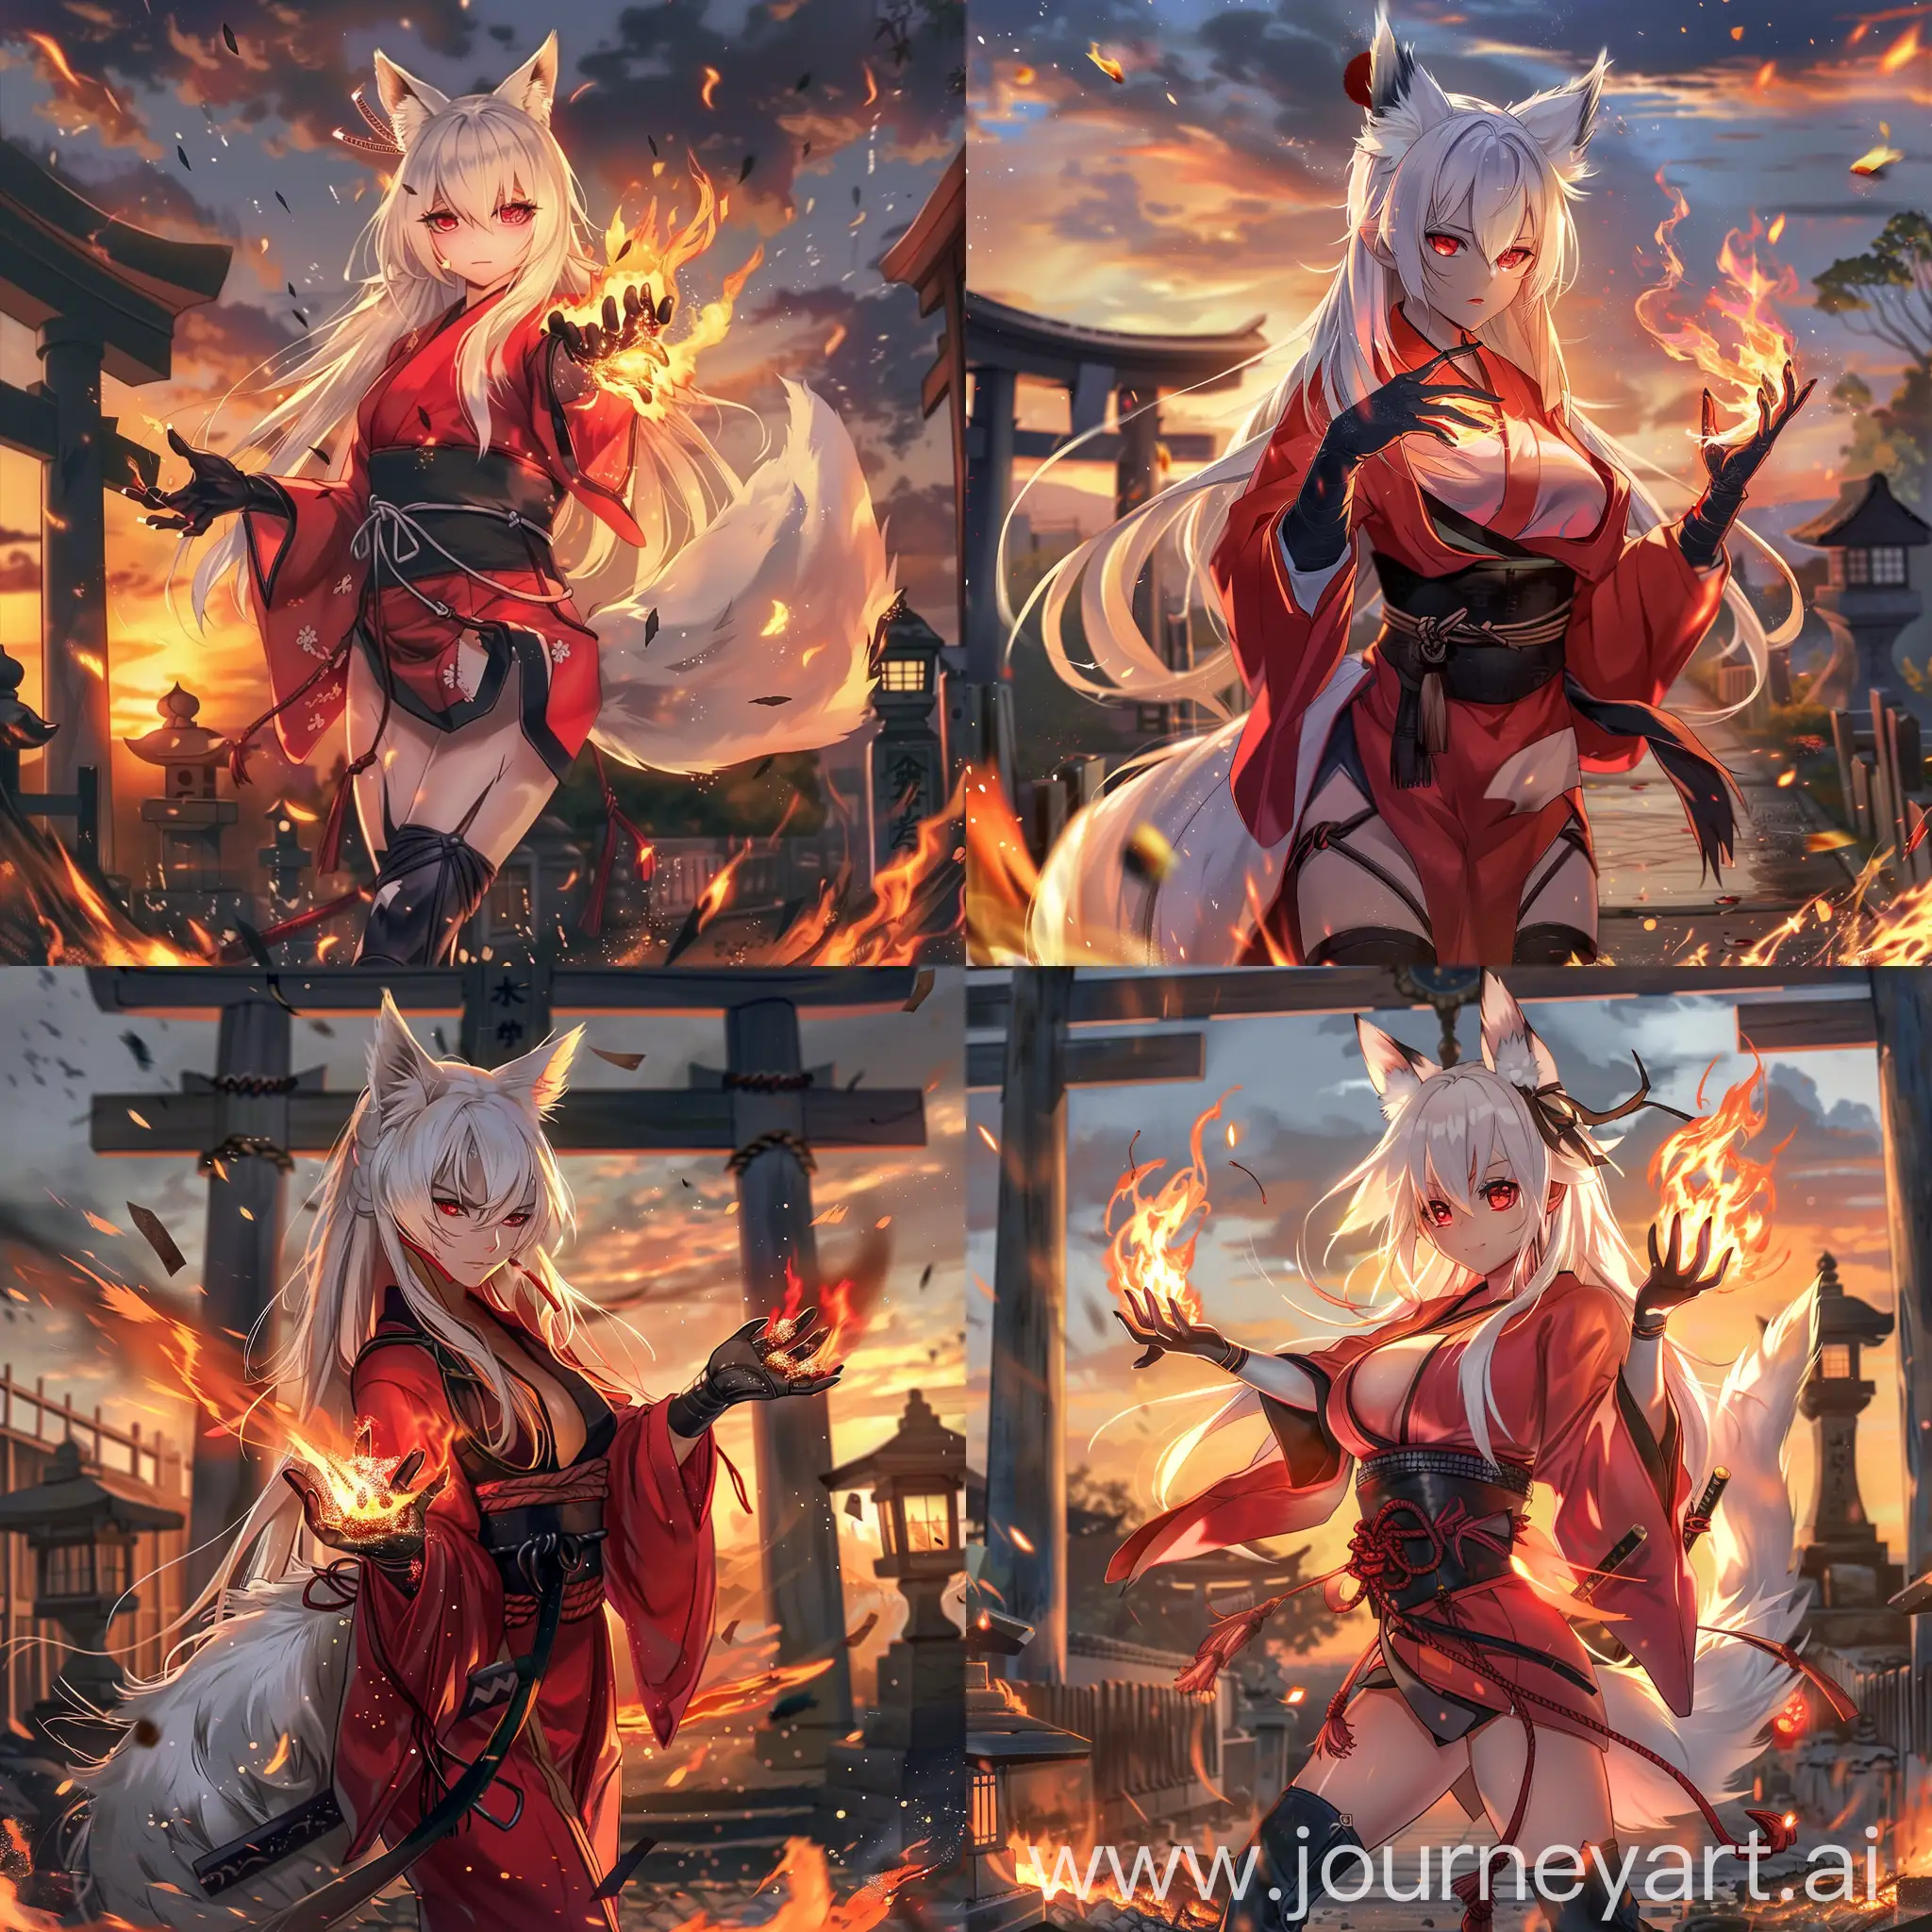 Fiery-RedEyed-Fox-Sorceress-Conjuring-Flames-at-Sunset